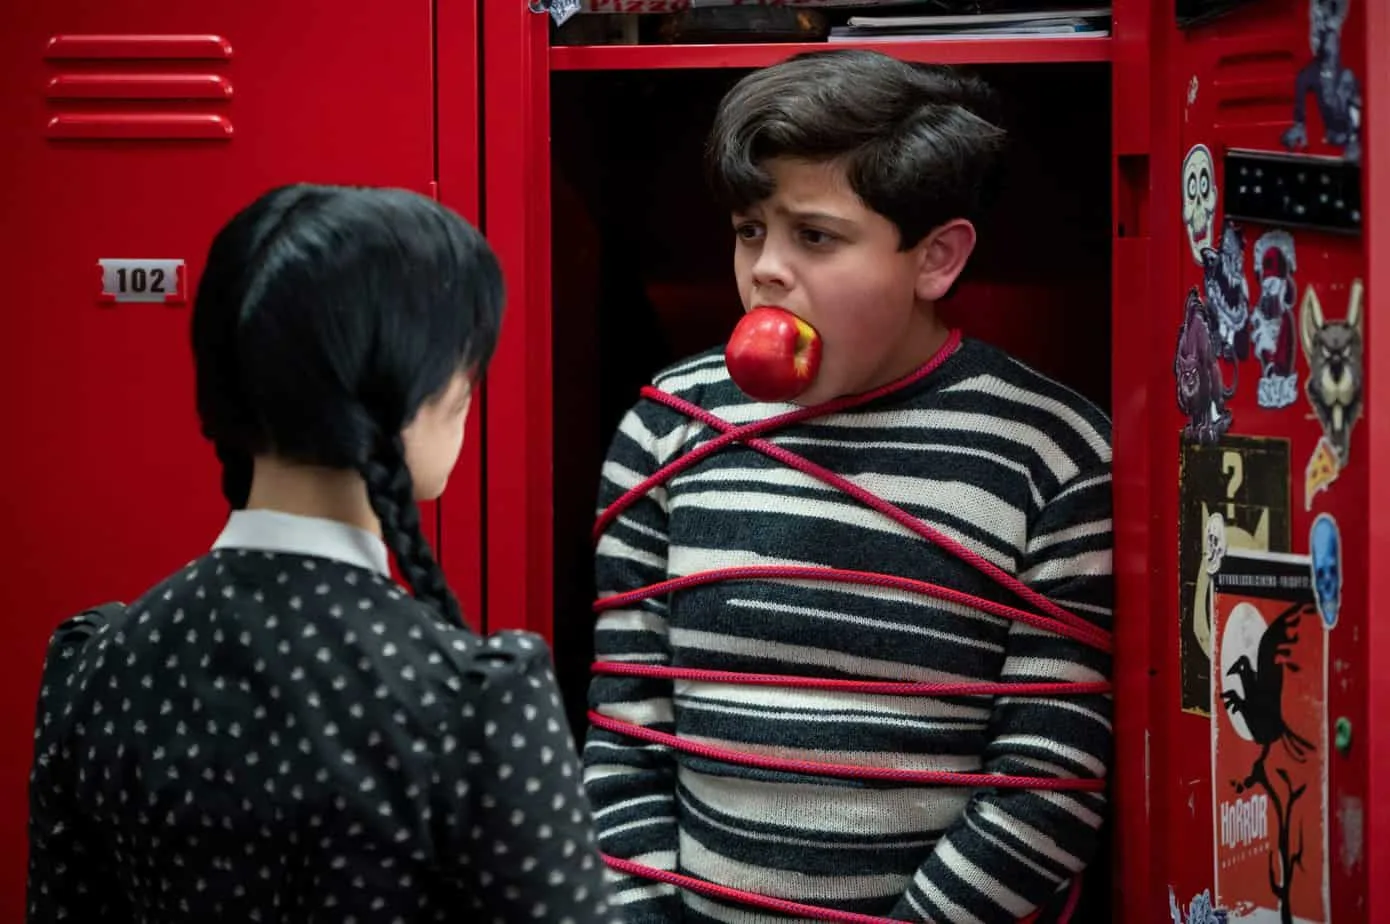 addams family quotes from Wednesday series on Netflix. Boy tied up in locker with an apple in mouth, girl looking at him.